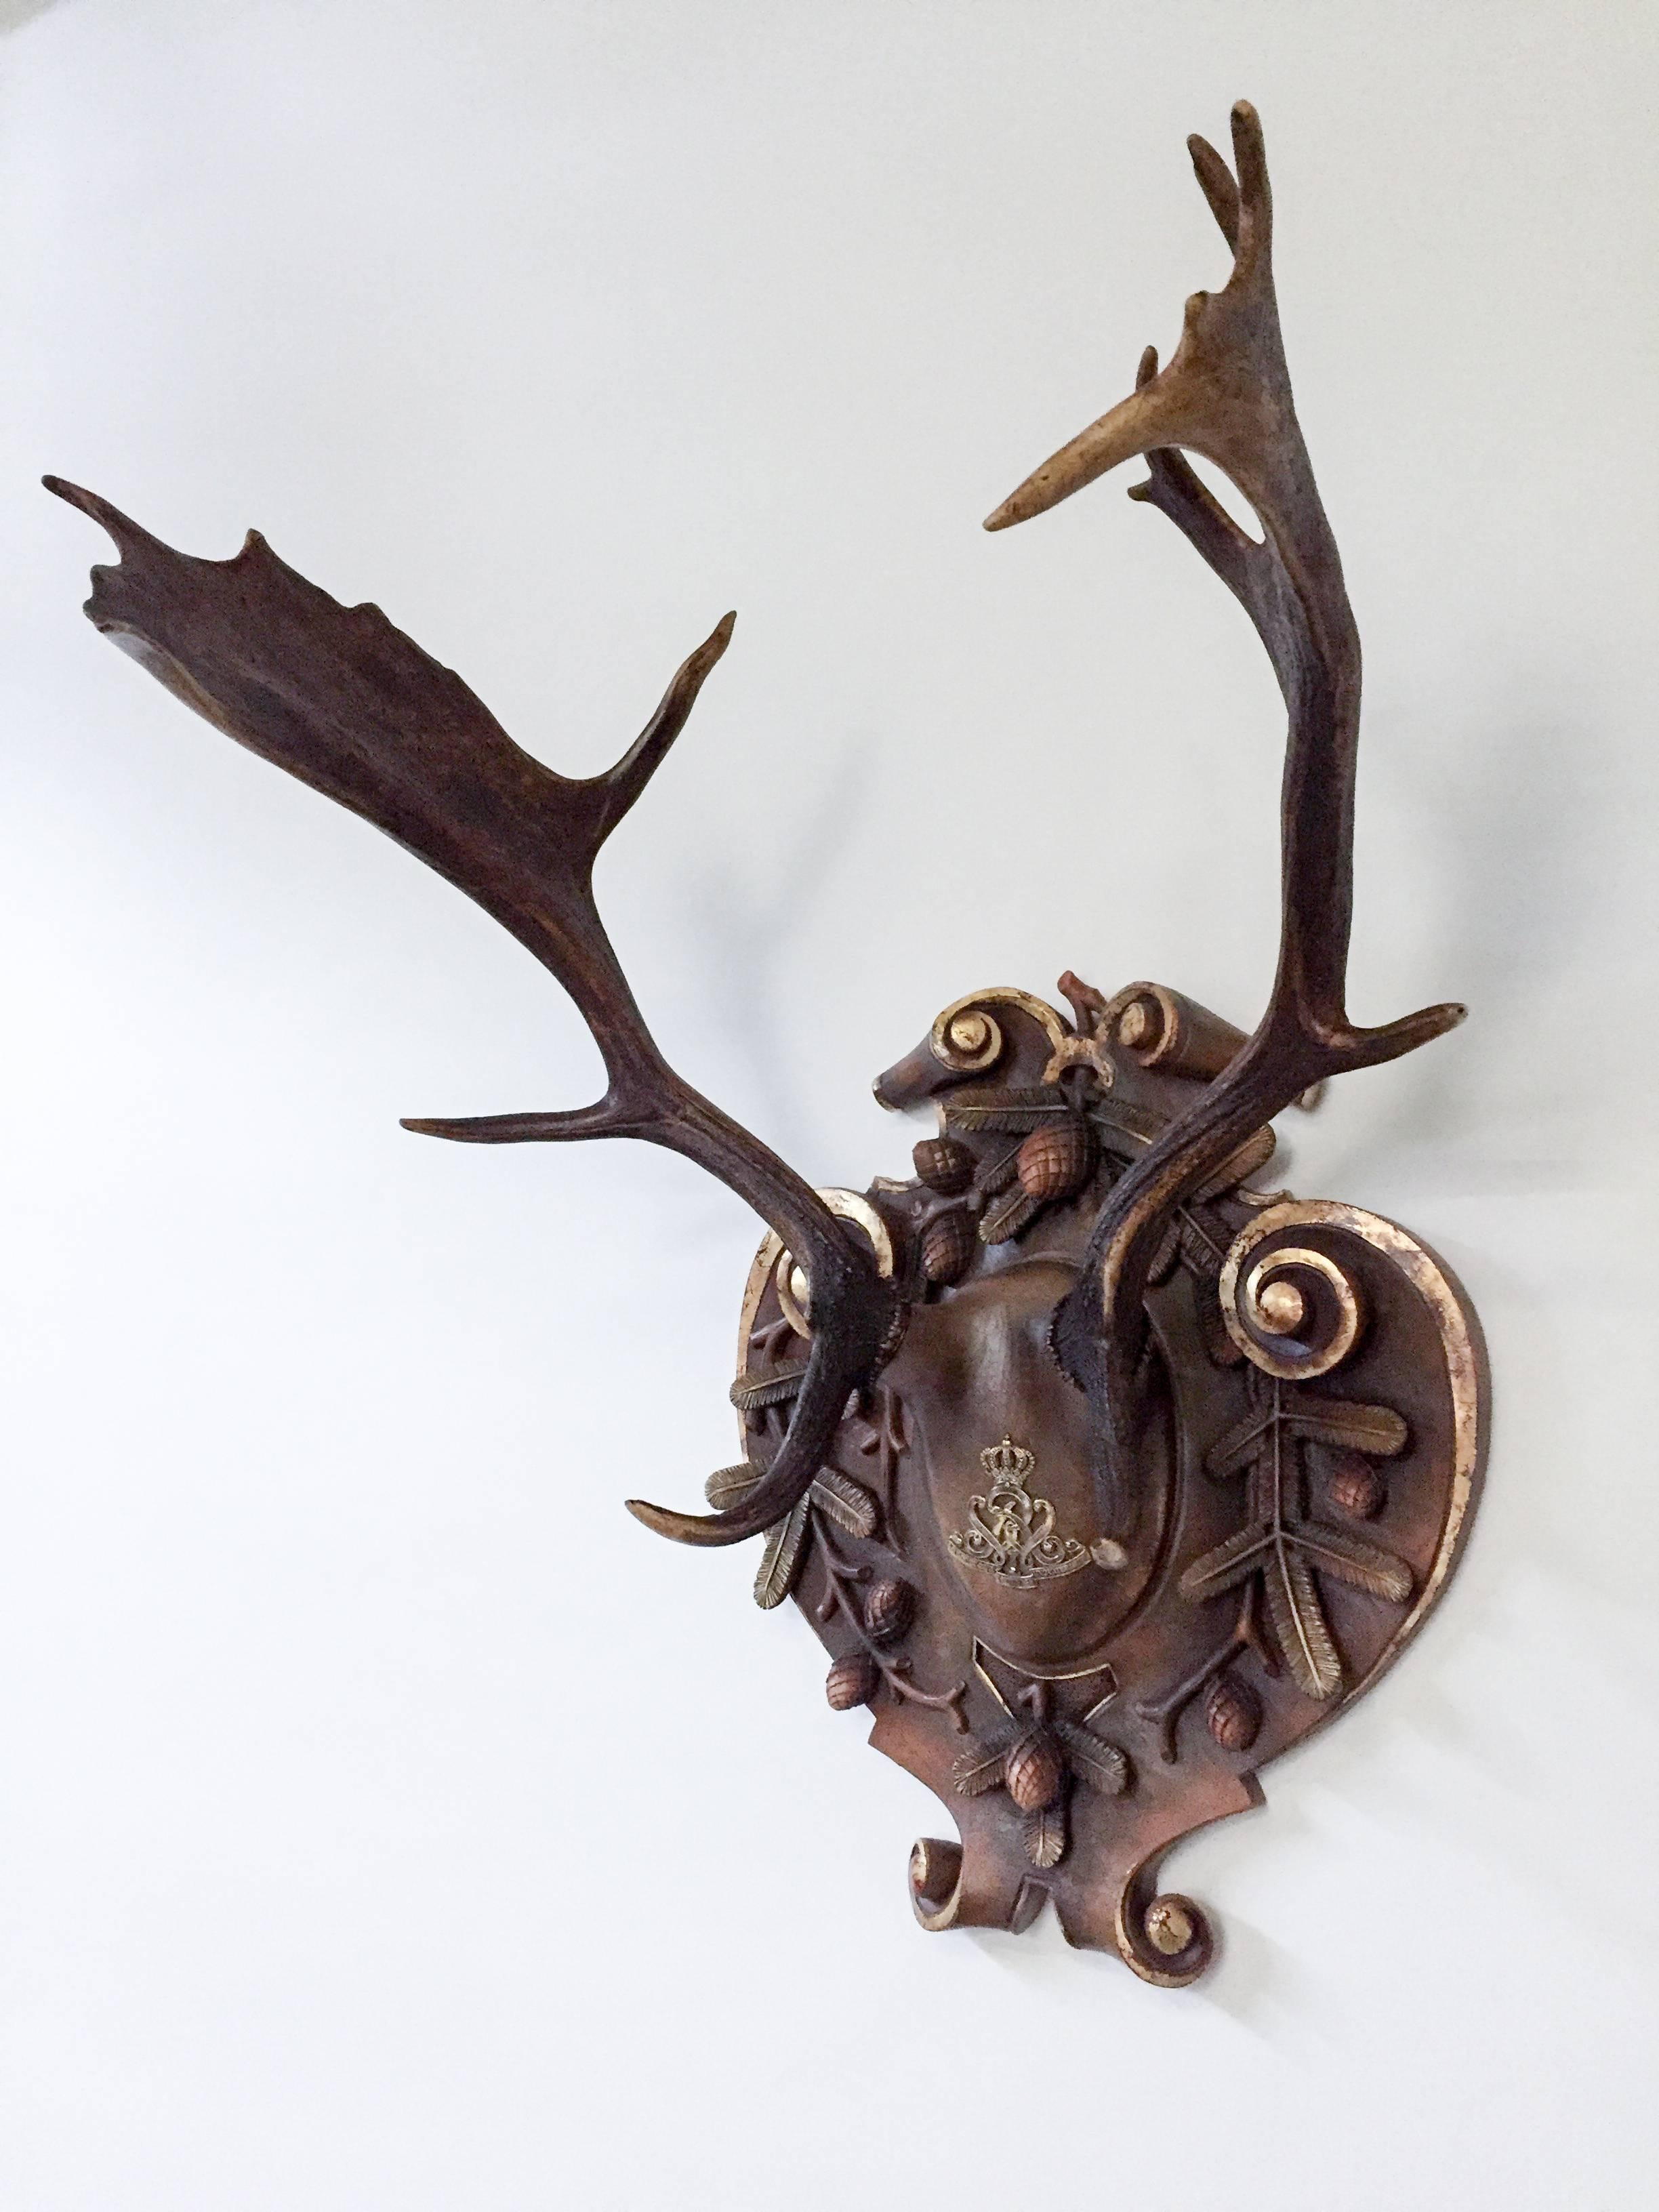 19th century fallow deer from Emperor Franz Josef's castle at Eckartsau in the Southern Austrian Alps, a favorite hunting schloss of the Habsburg Royal family. This historic hunting trophy features a replacement hand-carved linden wood plaque with